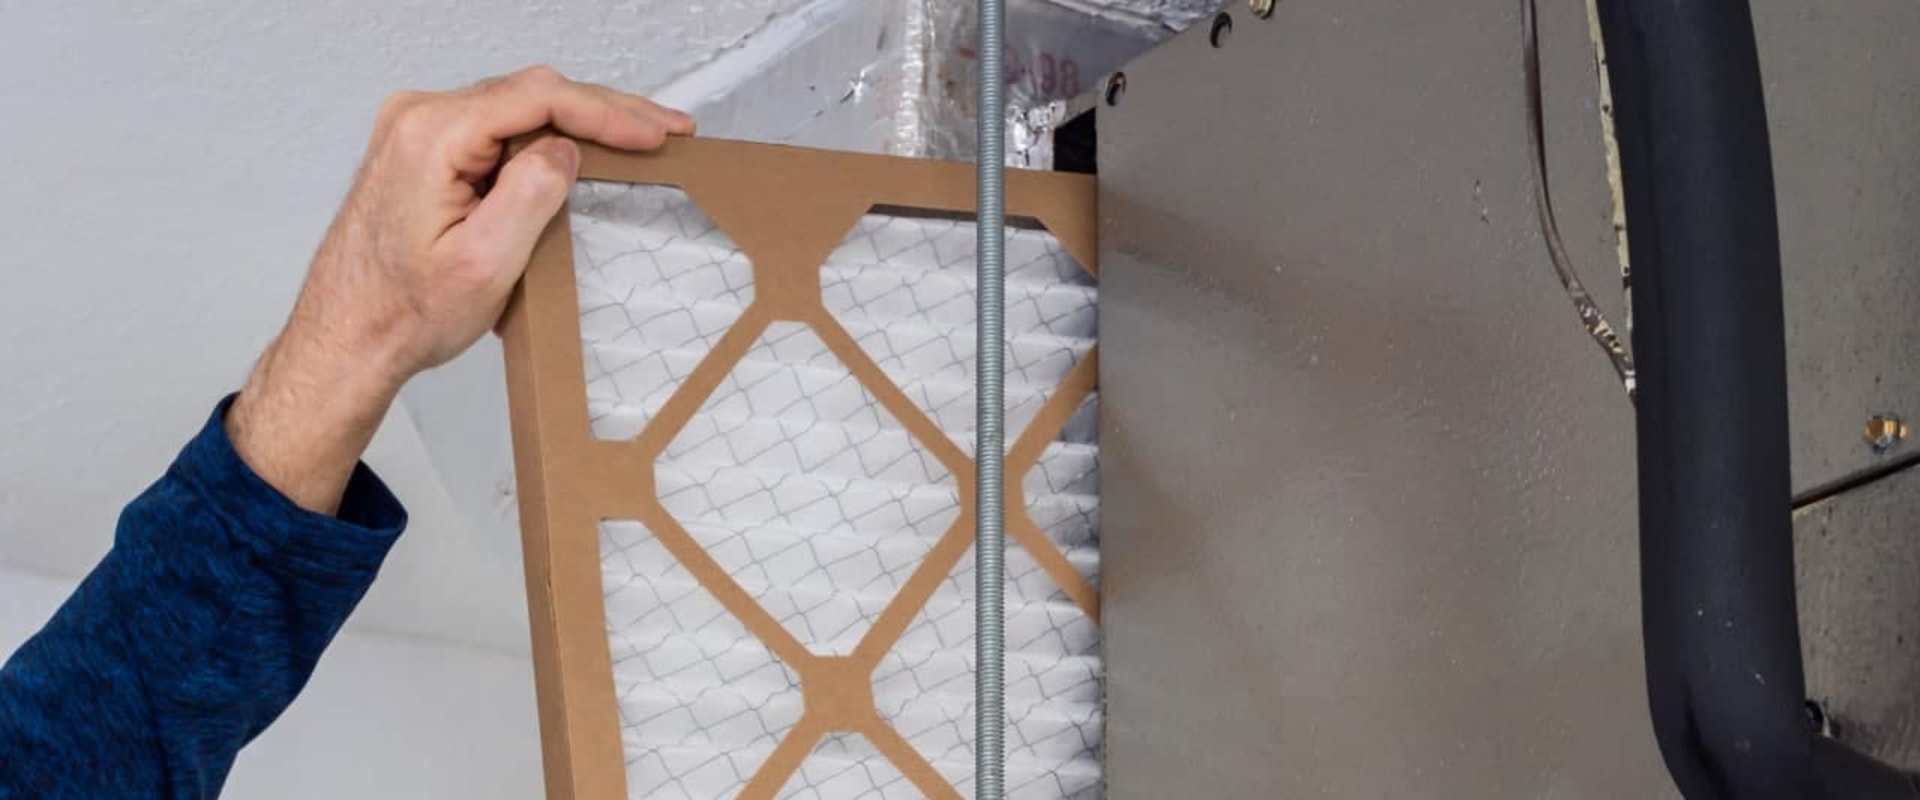 Can You Use a 1 Inch Furnace Filter Instead of 5? - An Expert's Perspective